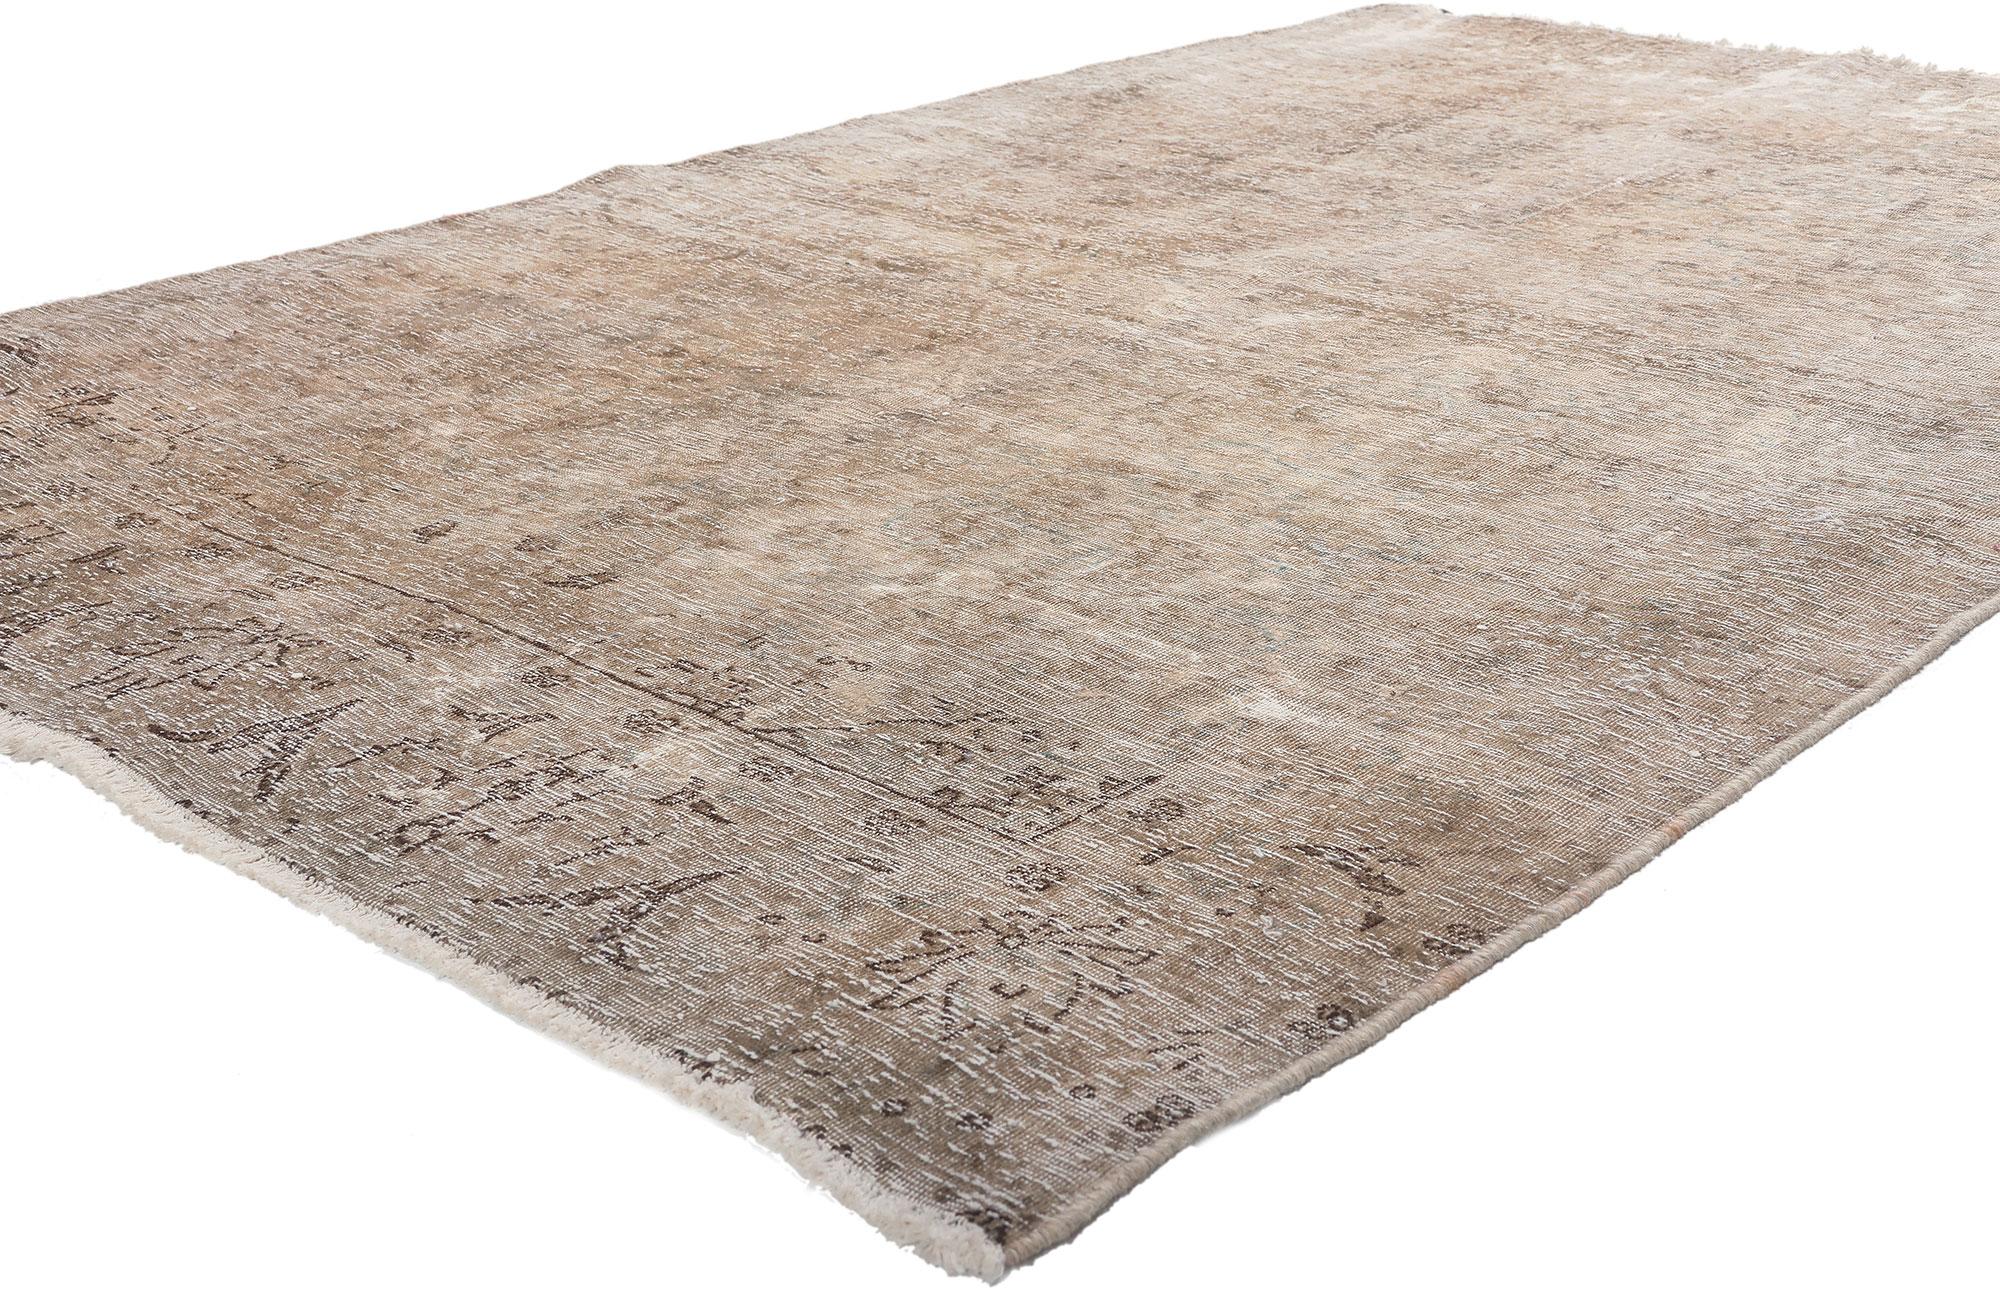 78598 Distressed Vintage Persian Tabriz Rug, 04'10 x 07'09. 
Weathered charm meets industrial luxe style in this distressed vintage Persian Tabriz rug. The washed-out floral pattern and muted earthy hues woven into this piece work together creating